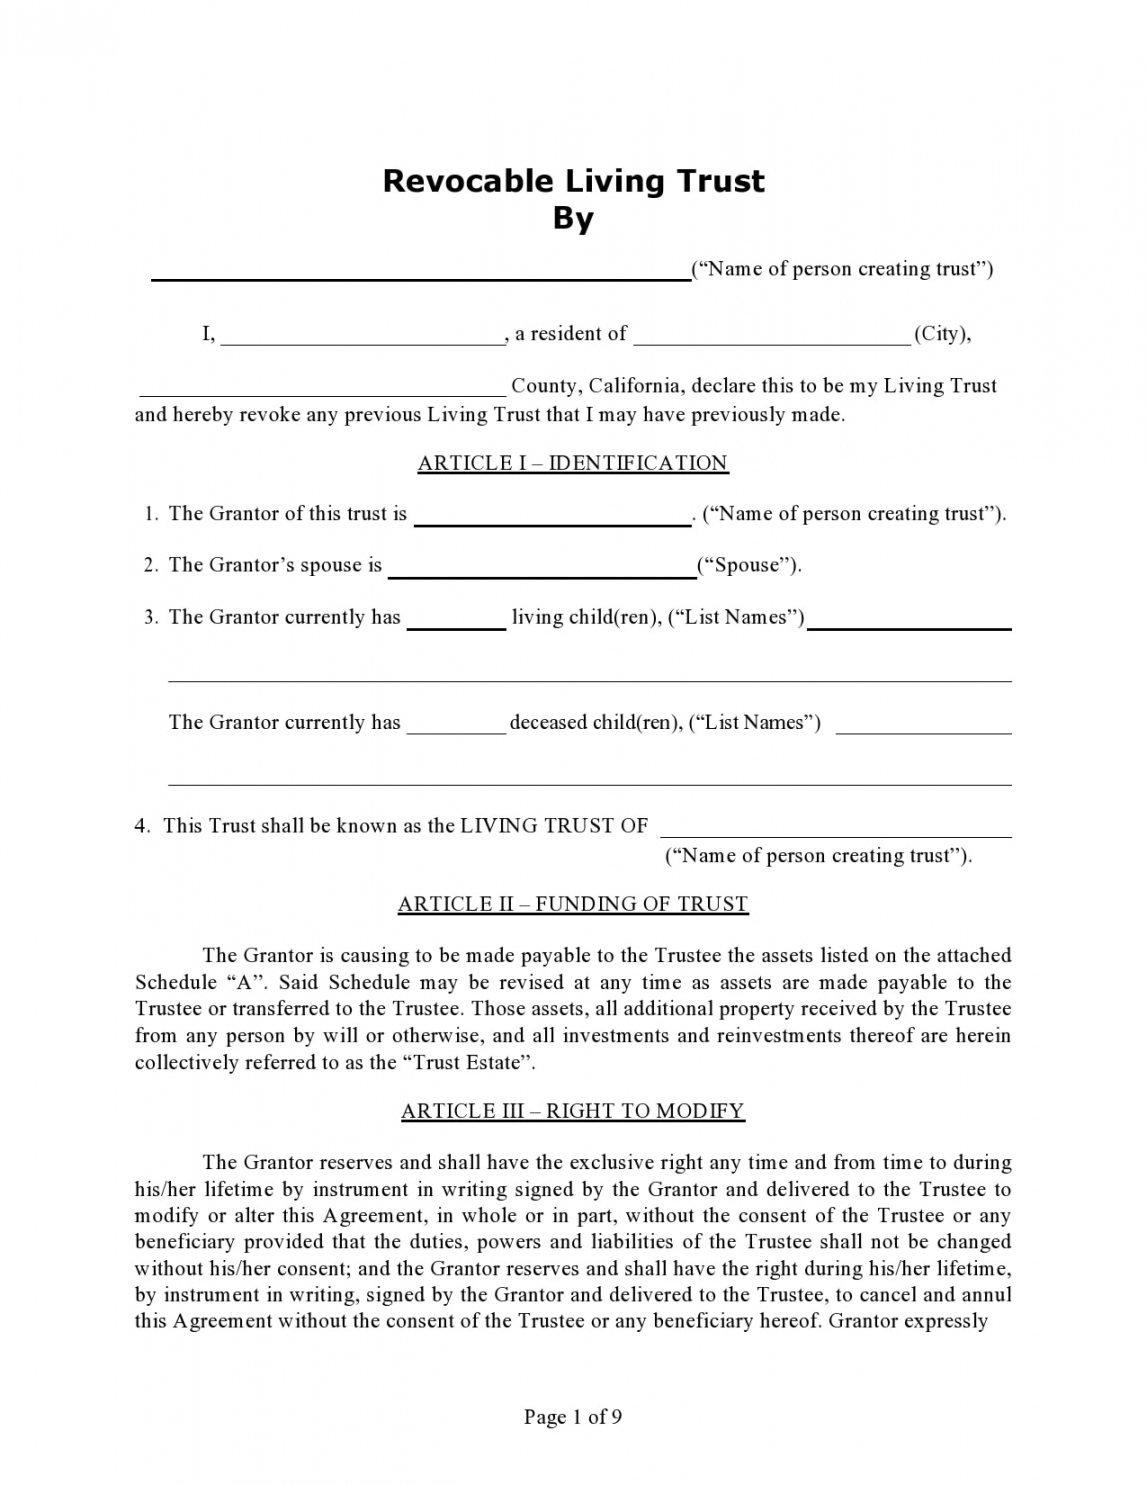 Free Living Trust Forms & Templates [Word] - TemplateArchive - FREE Printables - Free Printable Trust Forms